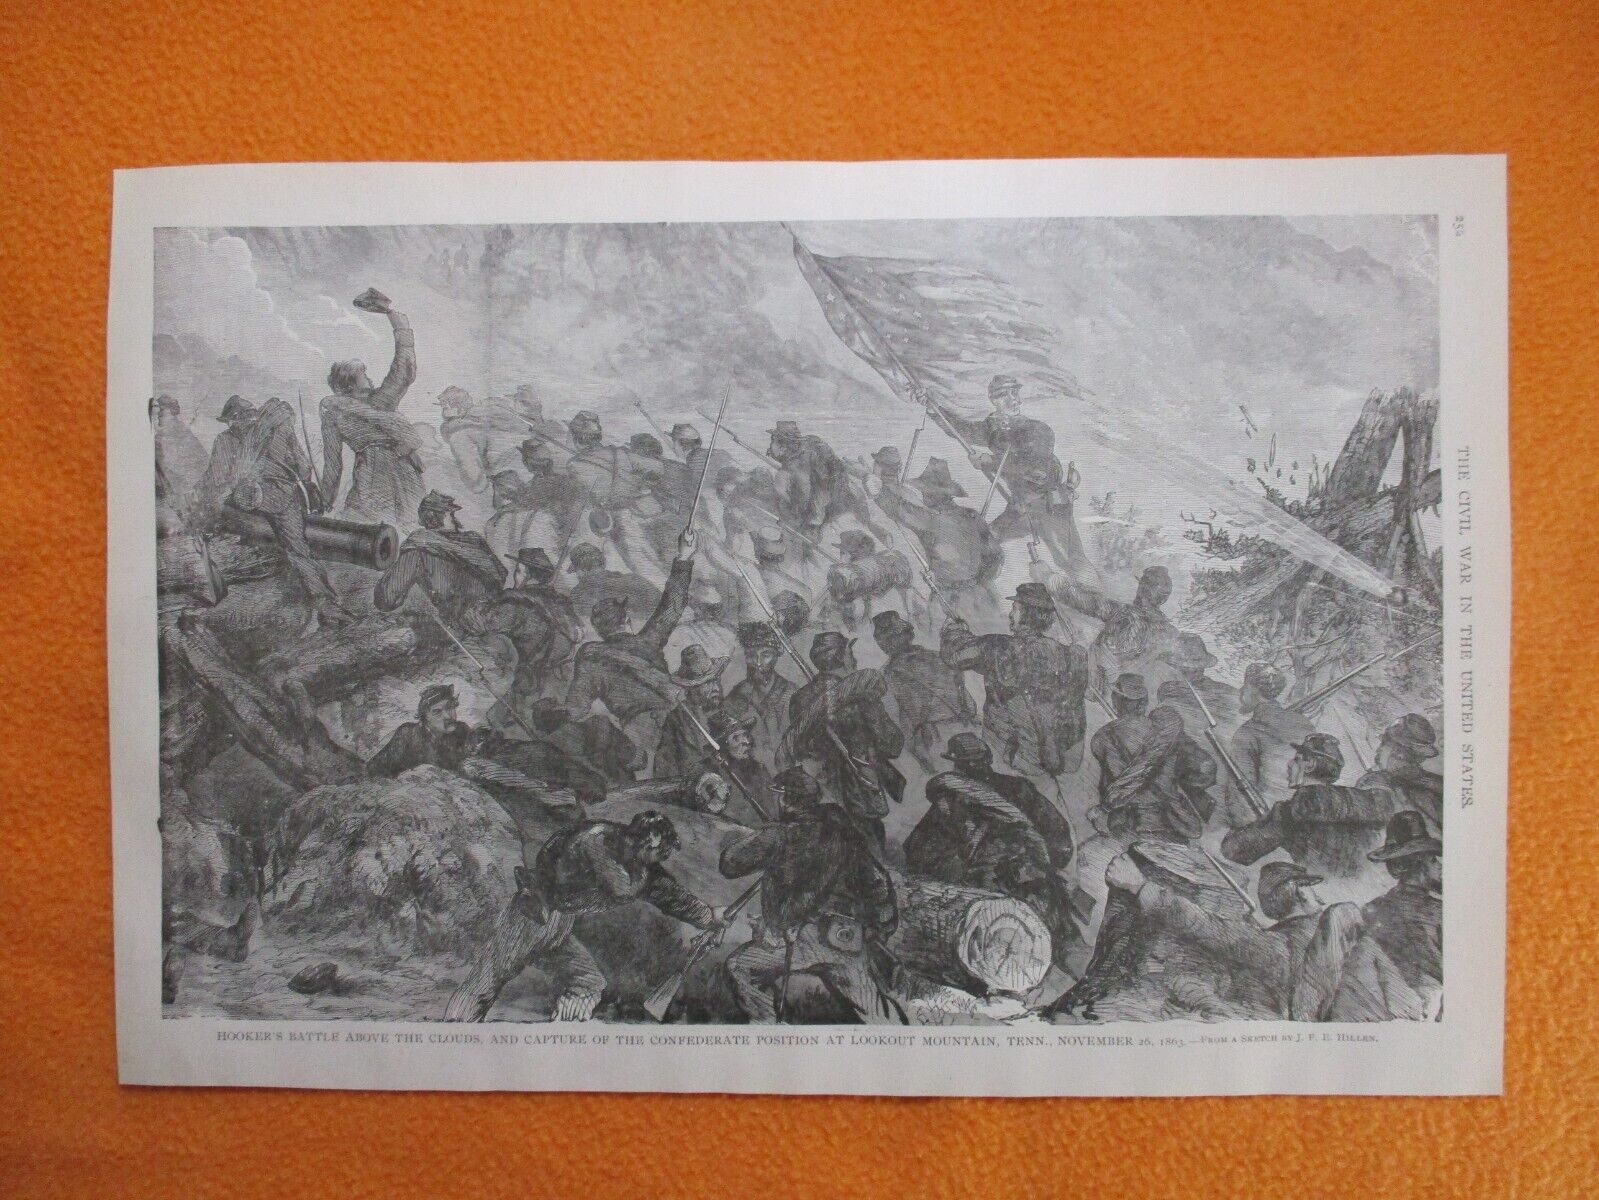 1885 Civil War Print - Battle Above The Clouds, Lookout Mountain, Tennessee 1863